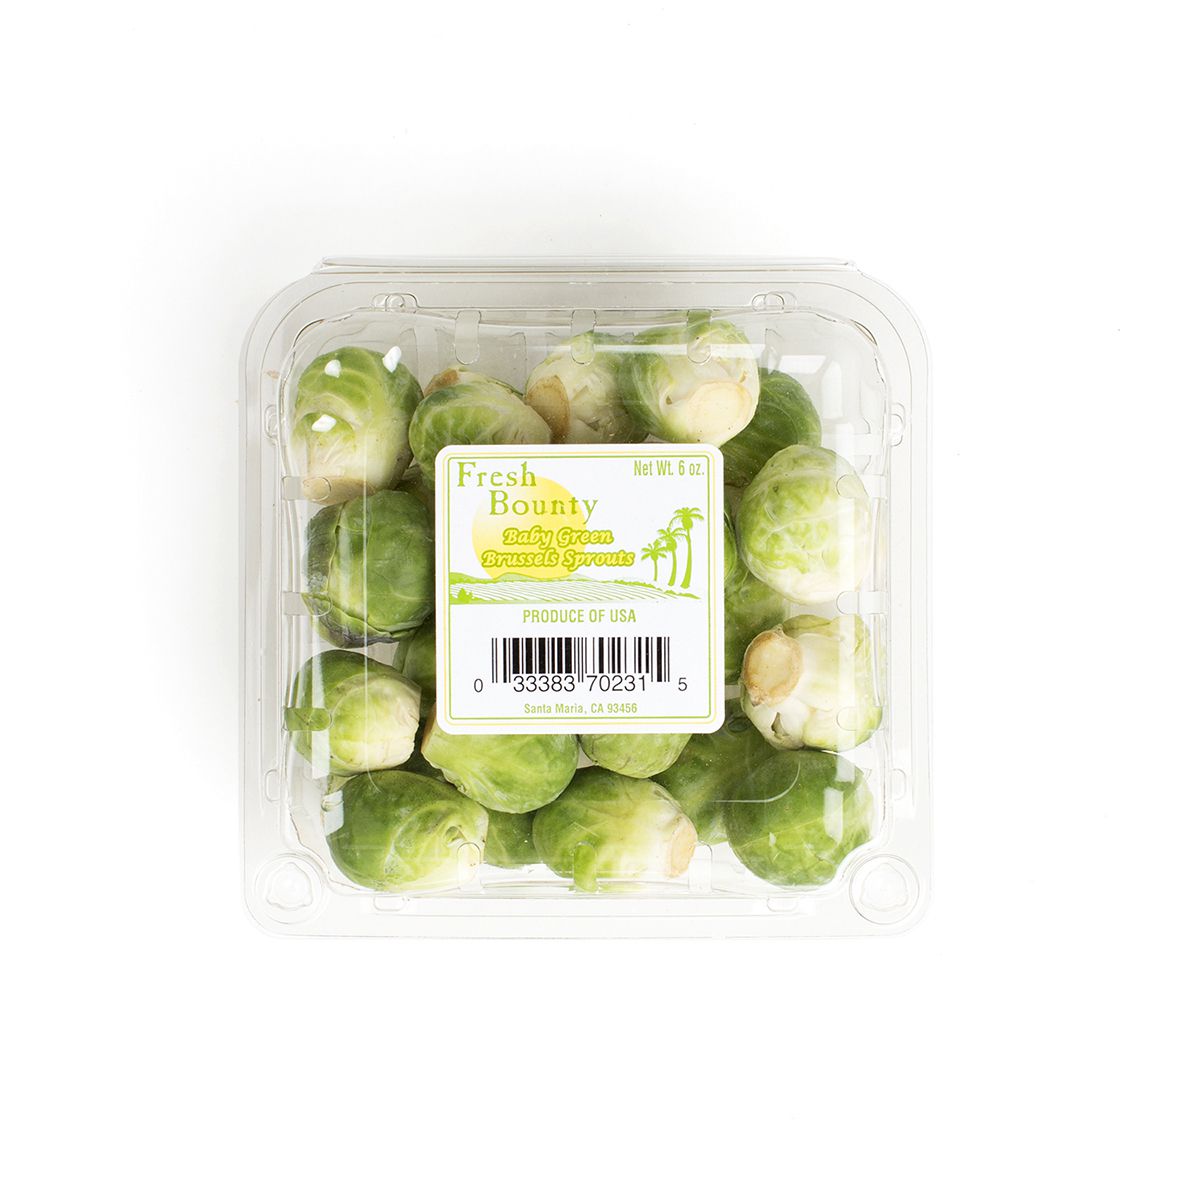 Ocean Mist Farms Cleaned Brussels Sprouts 3 LB